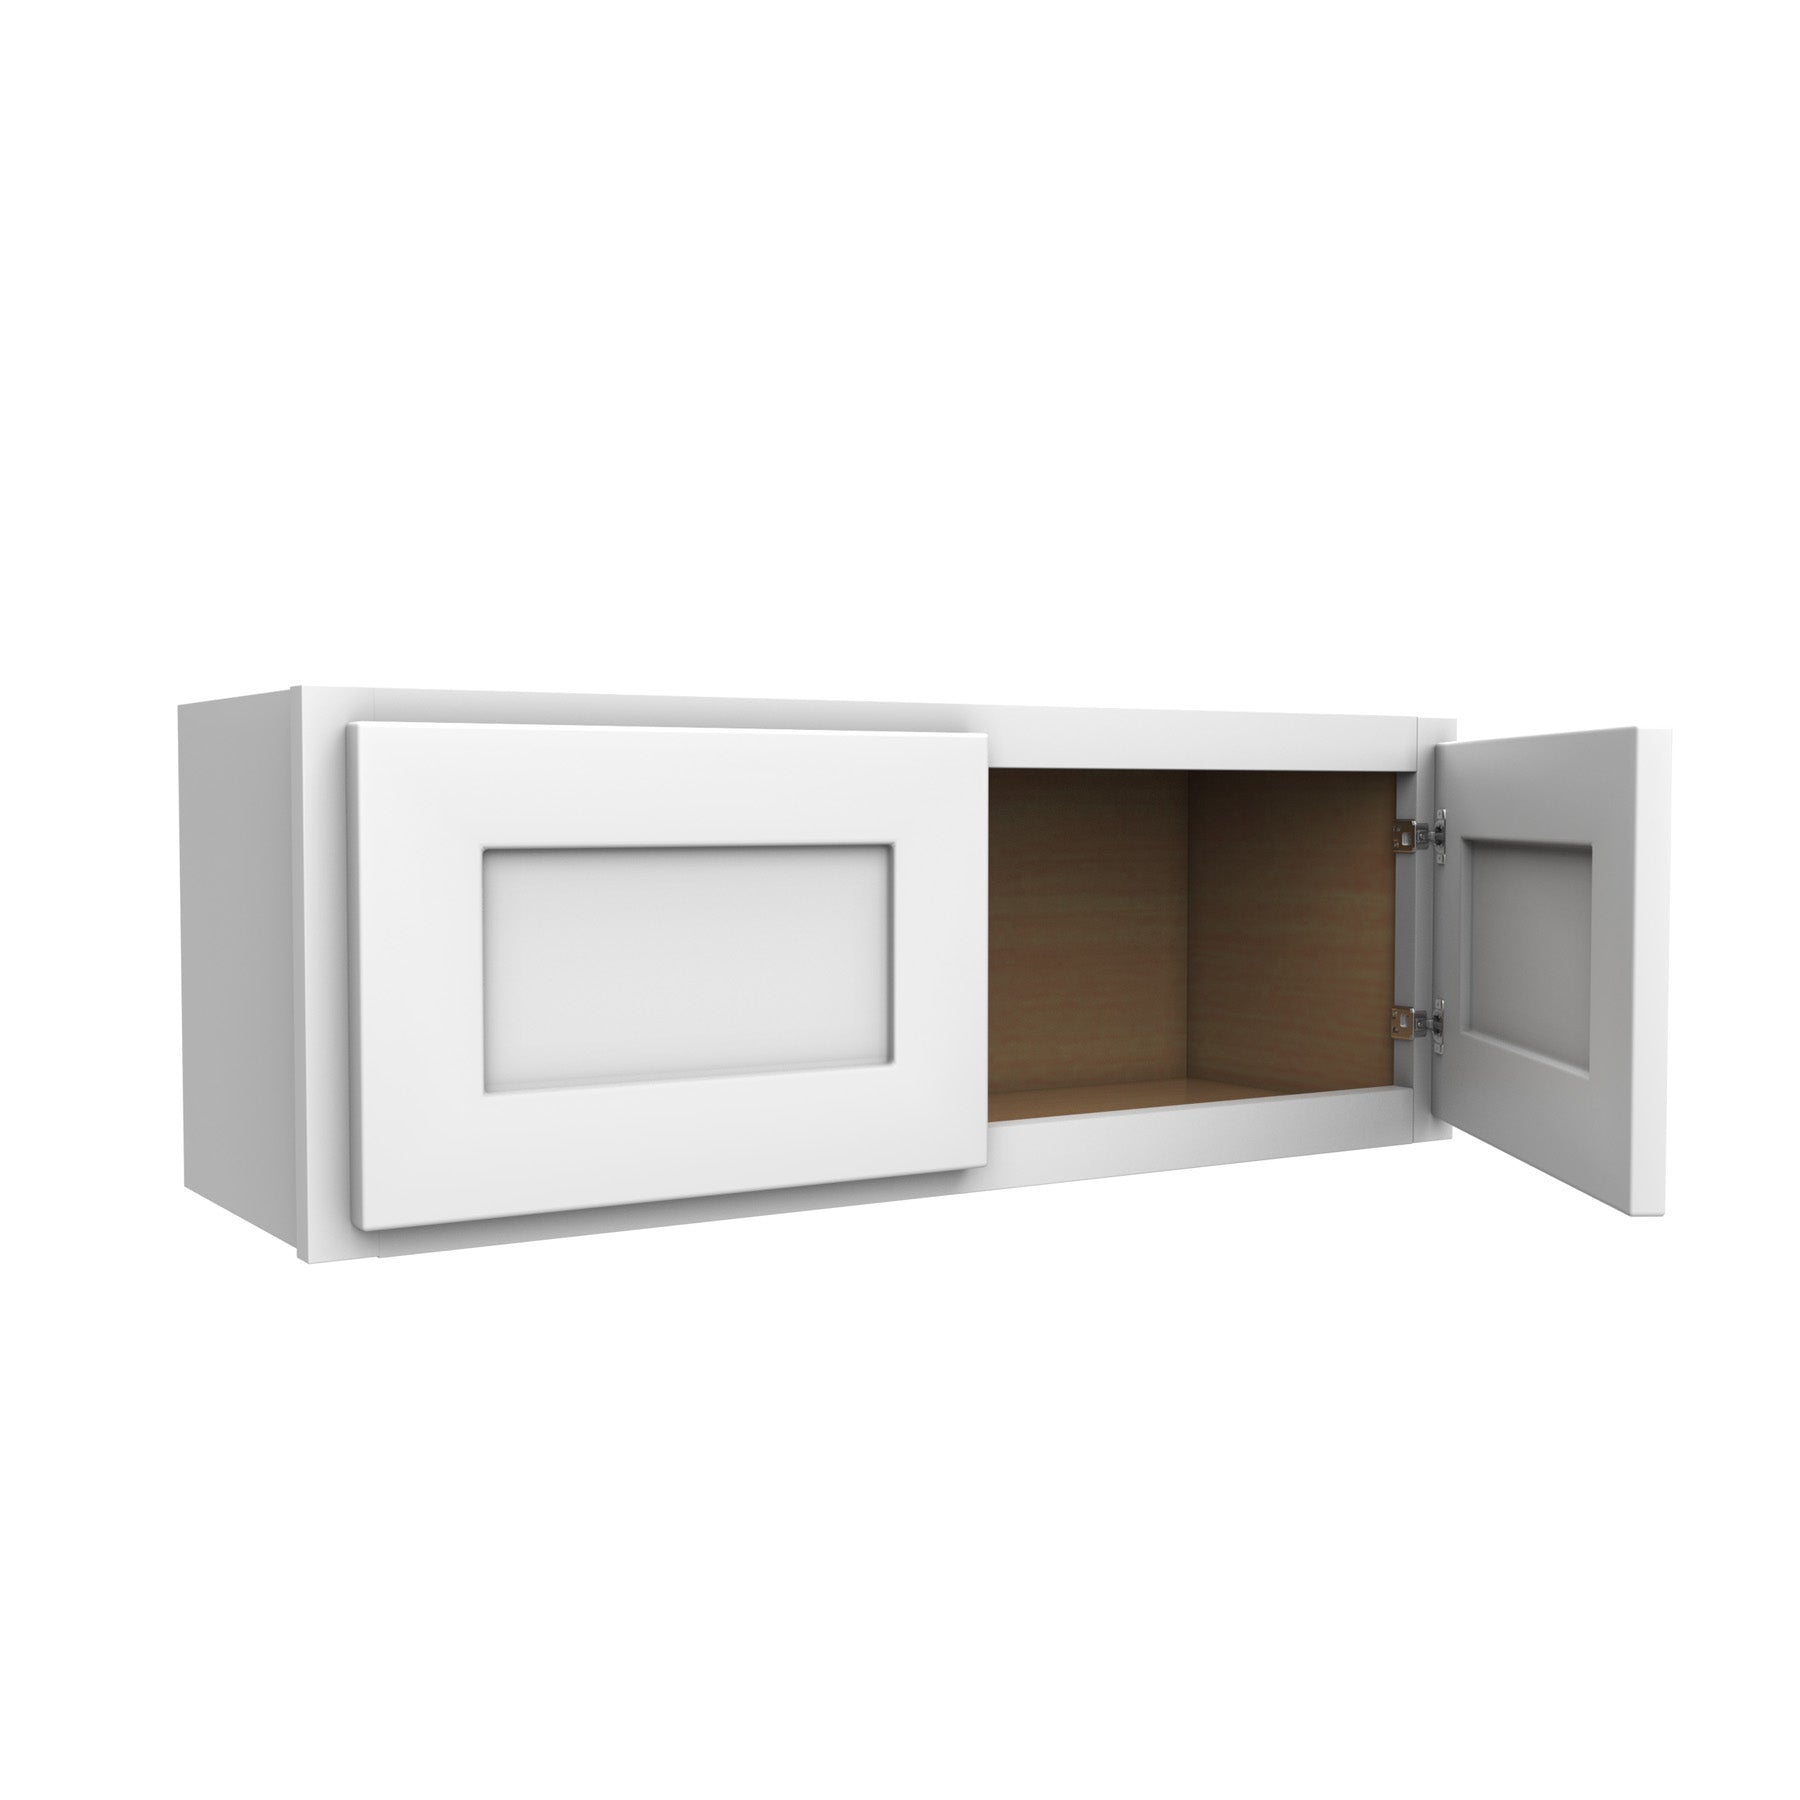 Luxor White - Double Door Wall Cabinet | 33"W x 12"H x 12"D